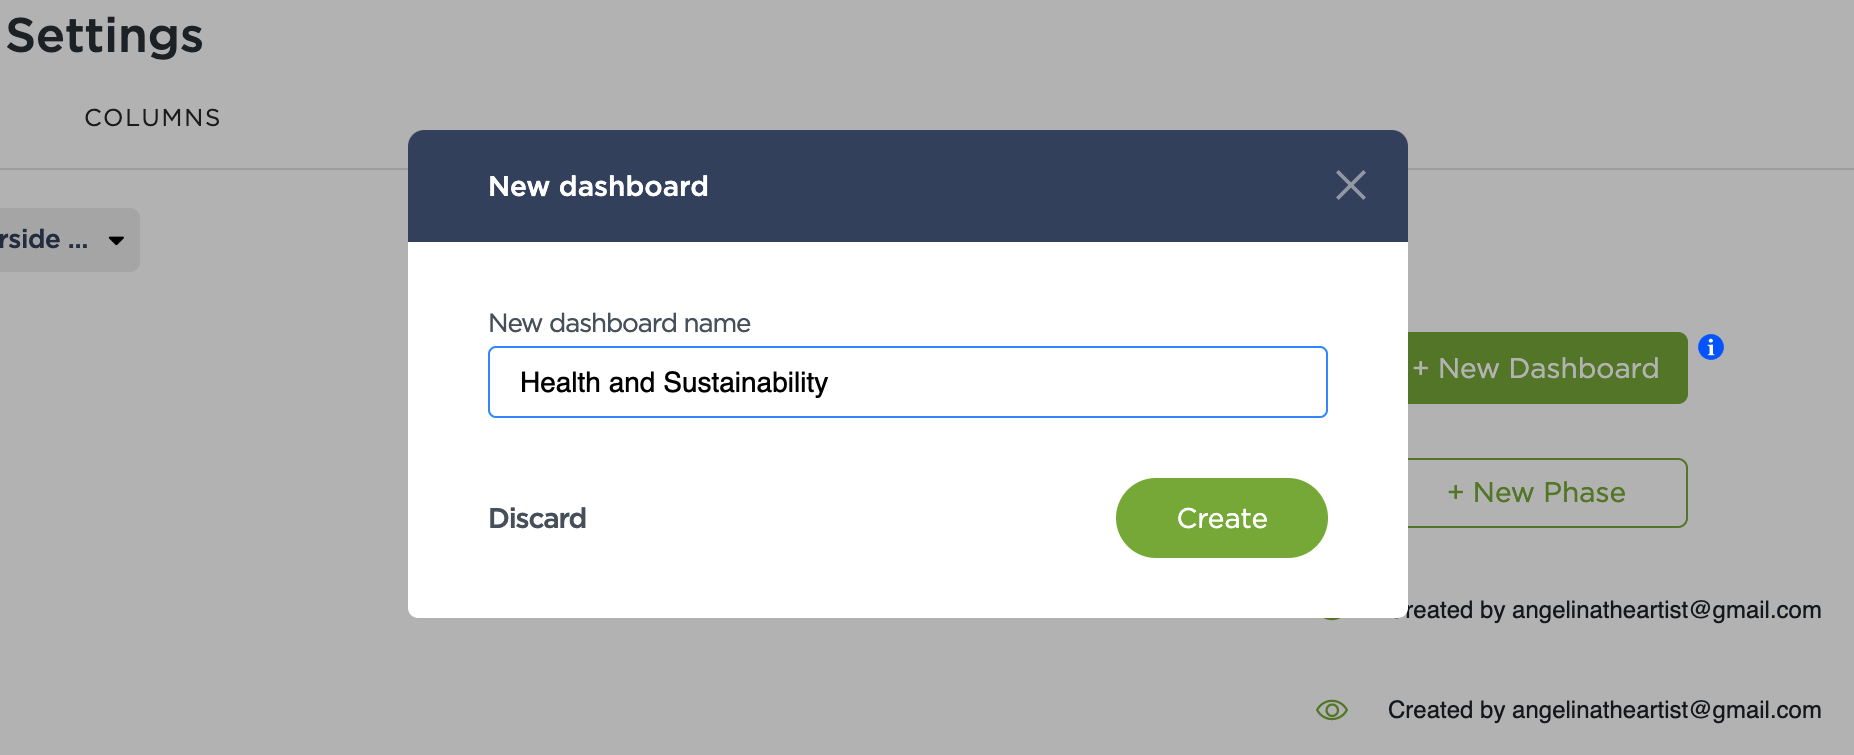 Incorporating BrightSides's Health and Sustainability Materials Scoring Tool Into Your Fohlio Library | FF&E specification software | specifying sustainable materials 1